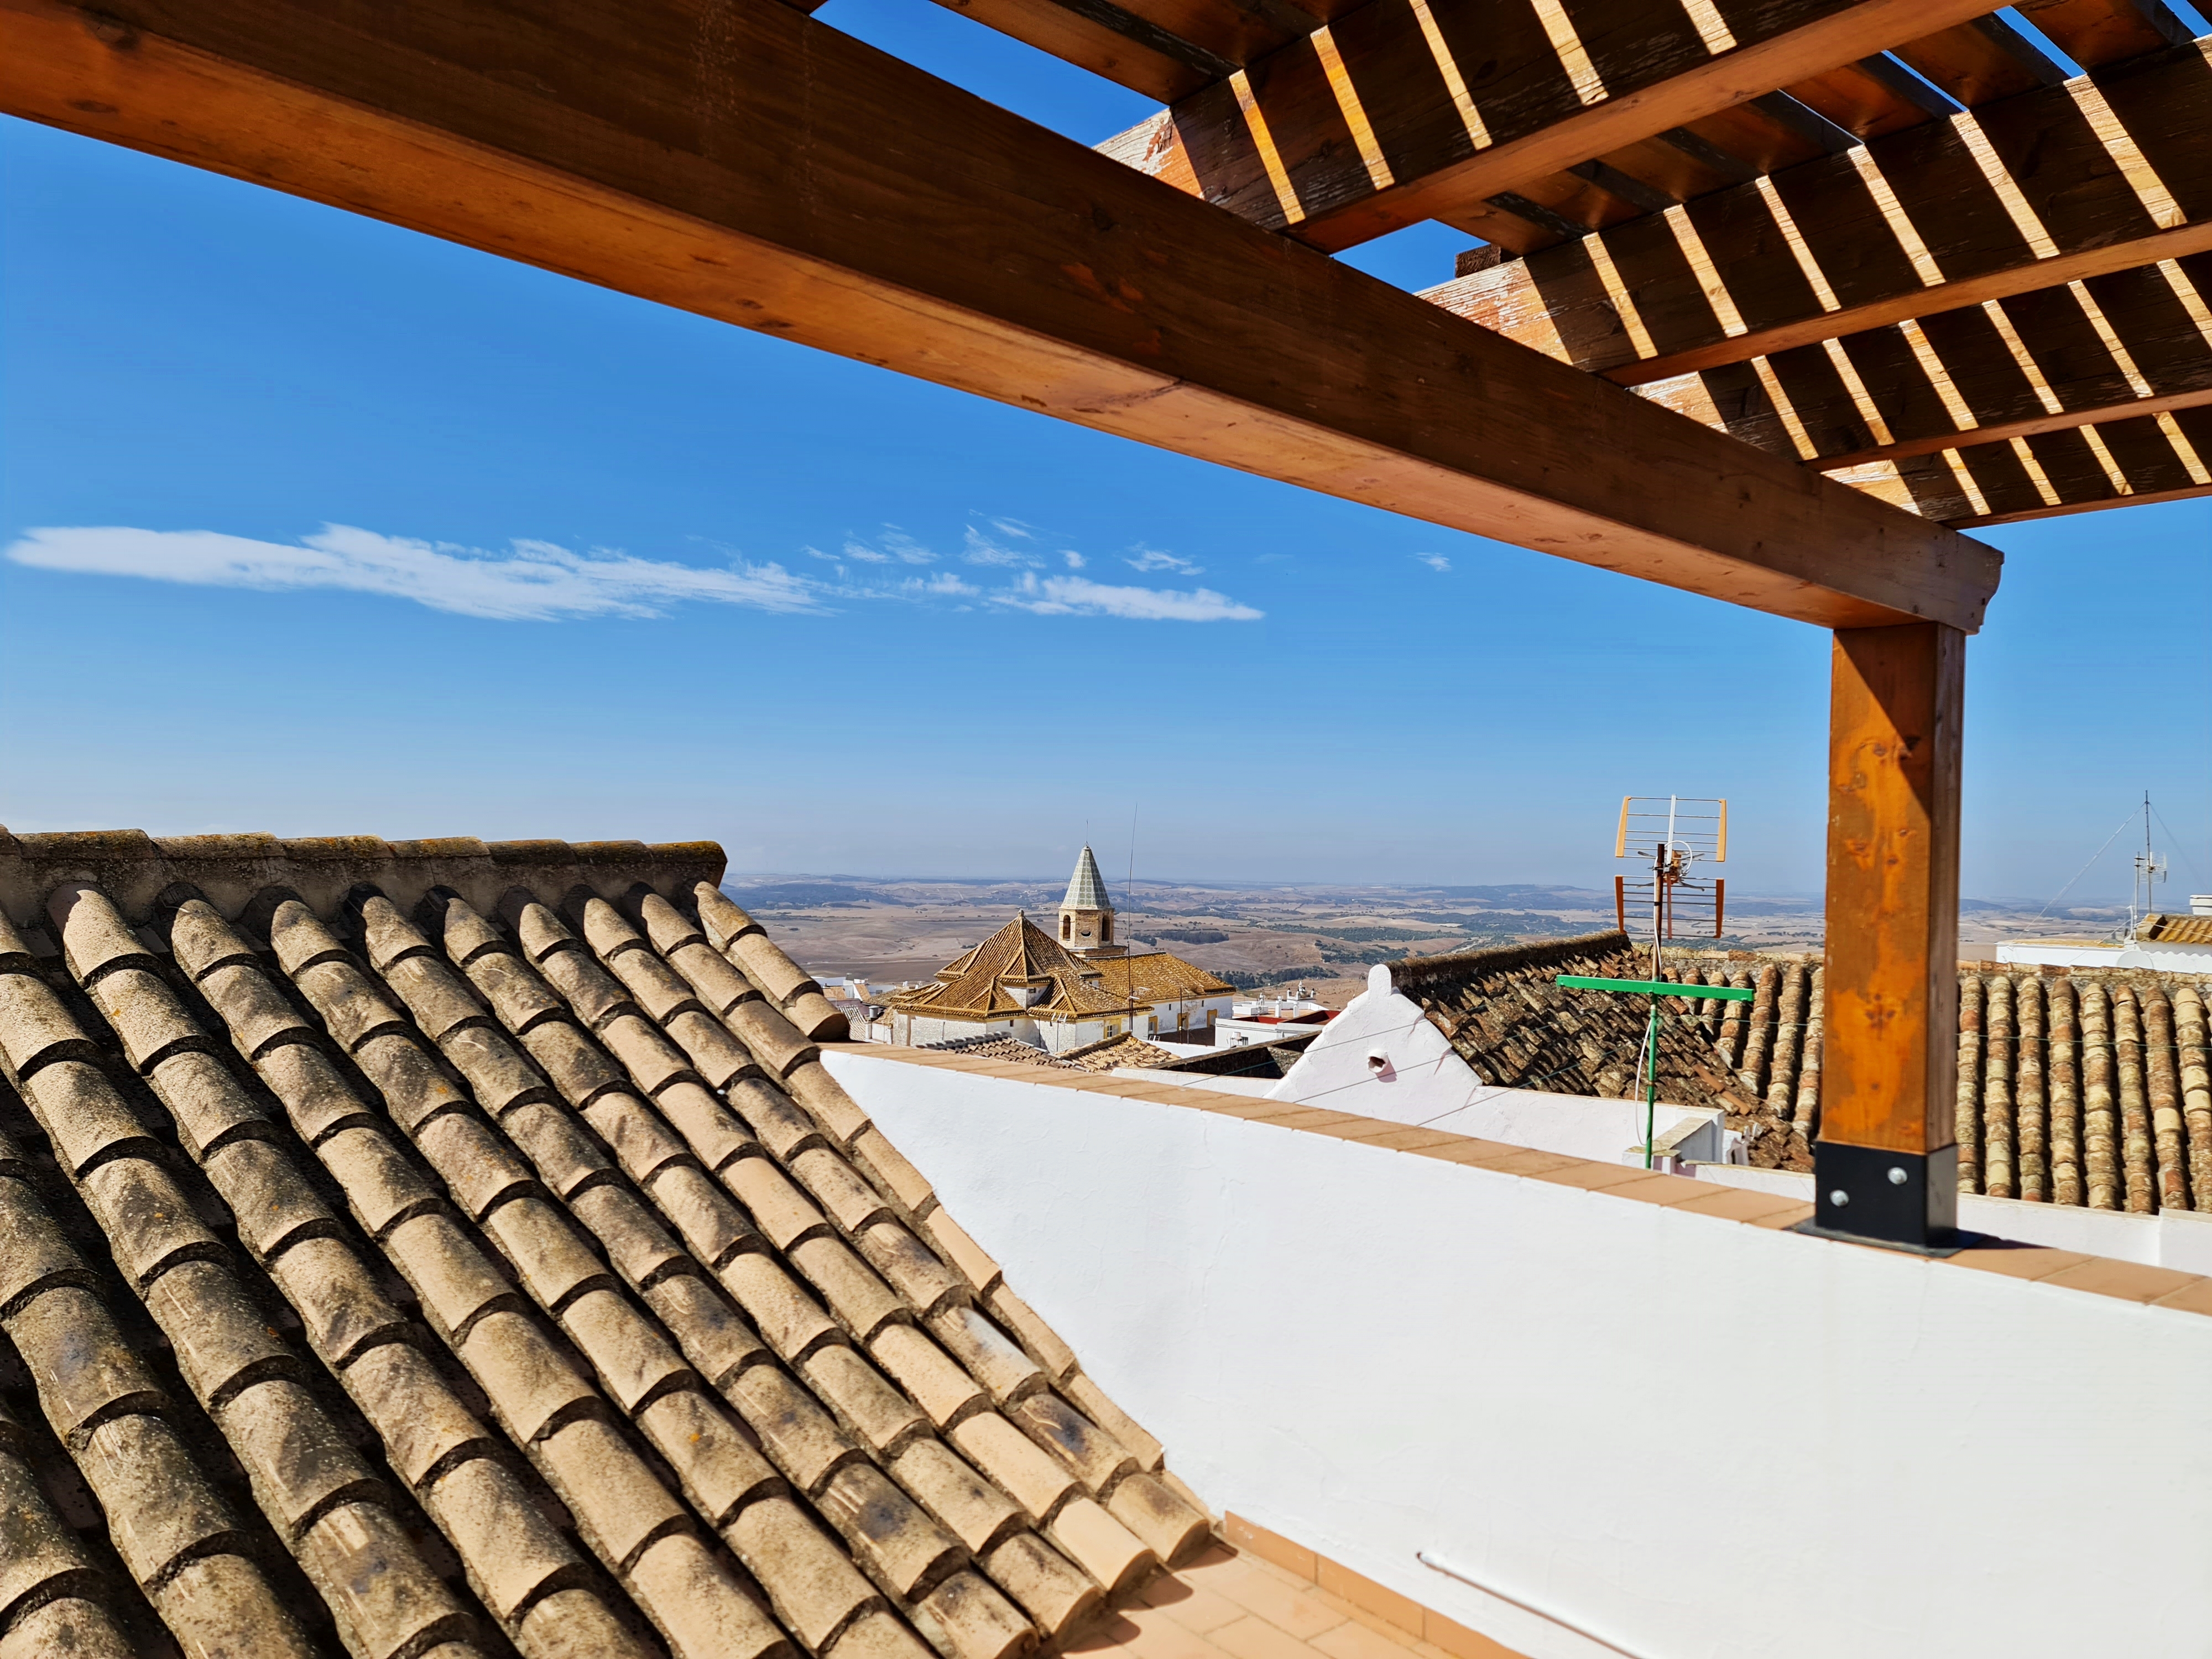 Apartment for sale in Medina Sidonia and surroundings 1